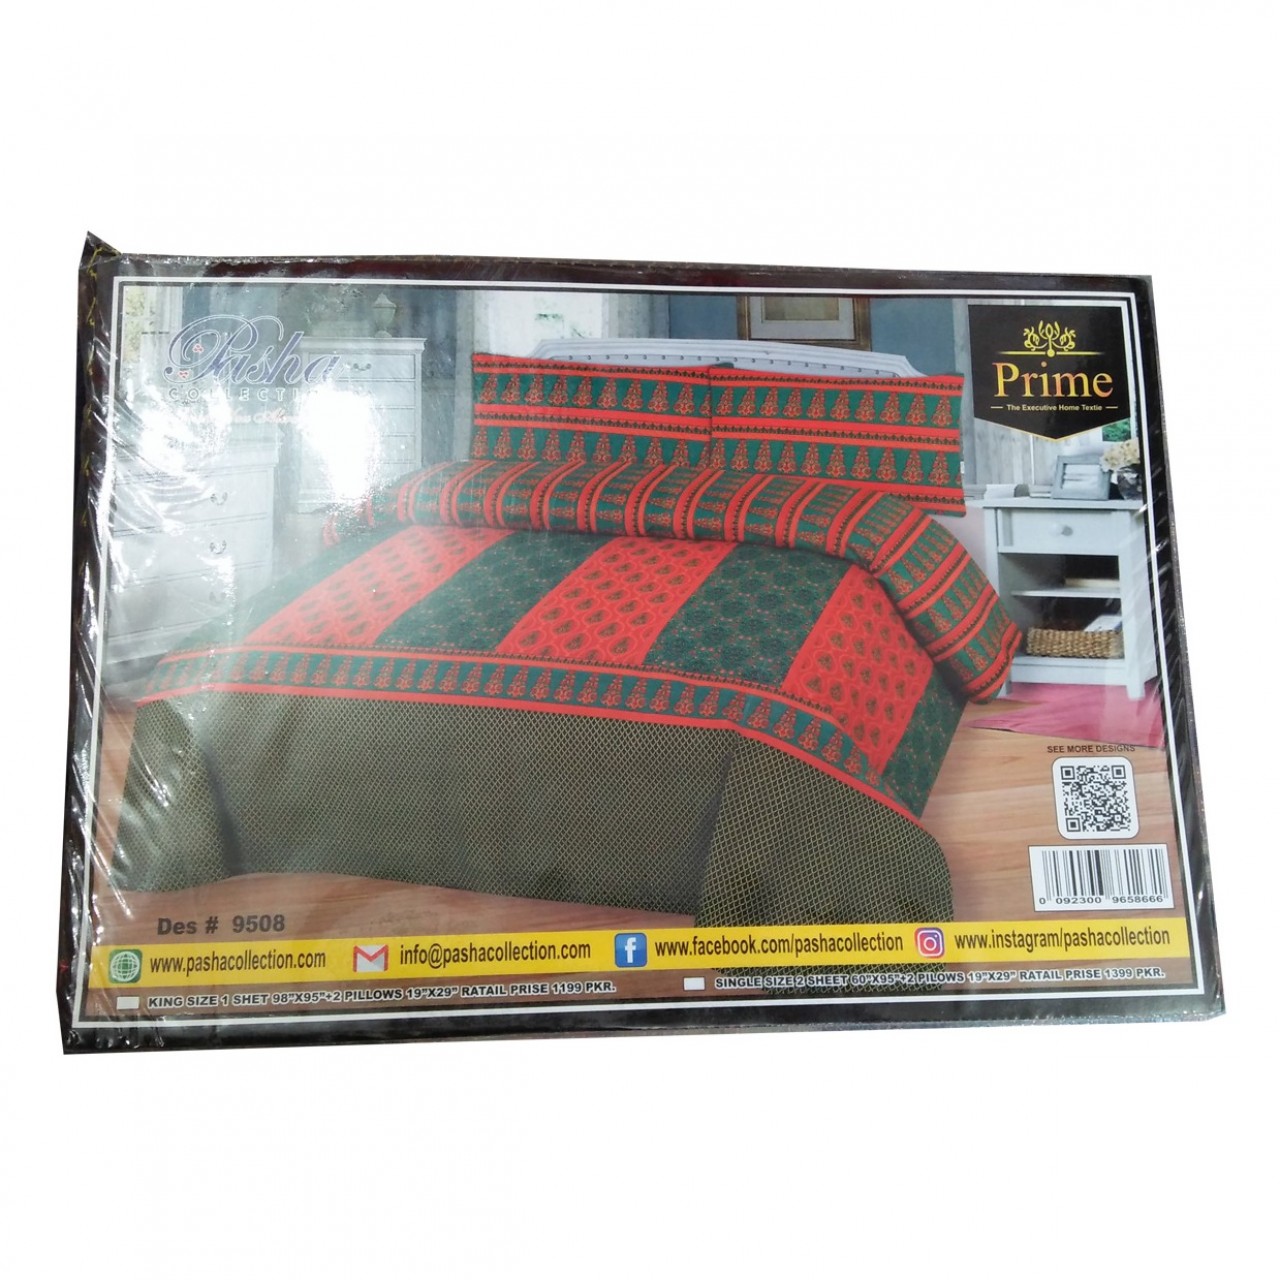 Prime King Size Double Bed Sheet Des-9508 With 2 Pillow Covers